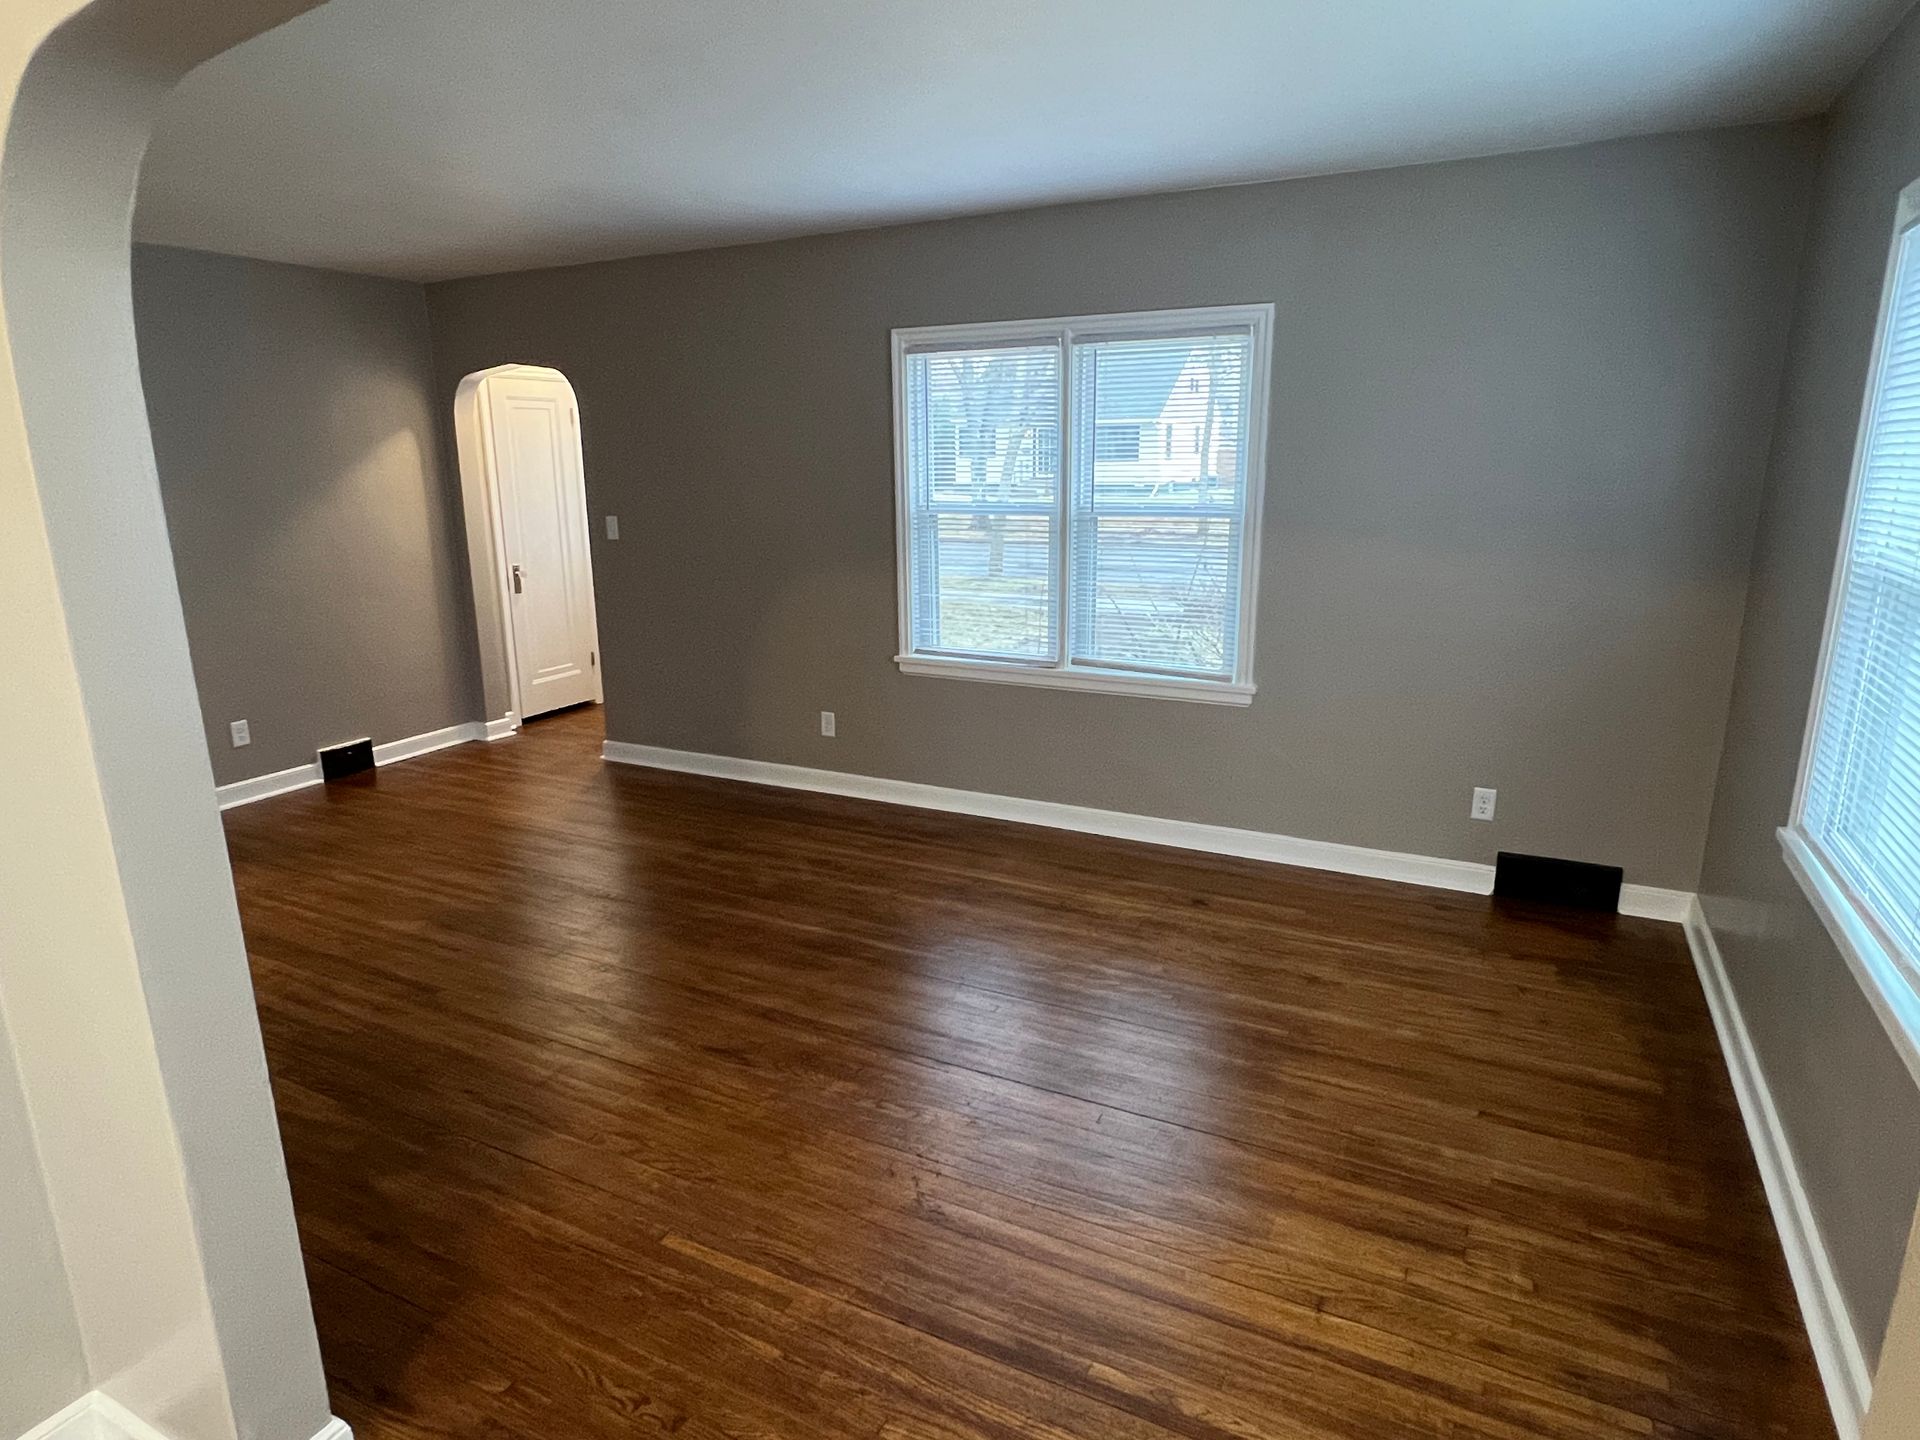 An empty living room with hardwood floors and two windows.